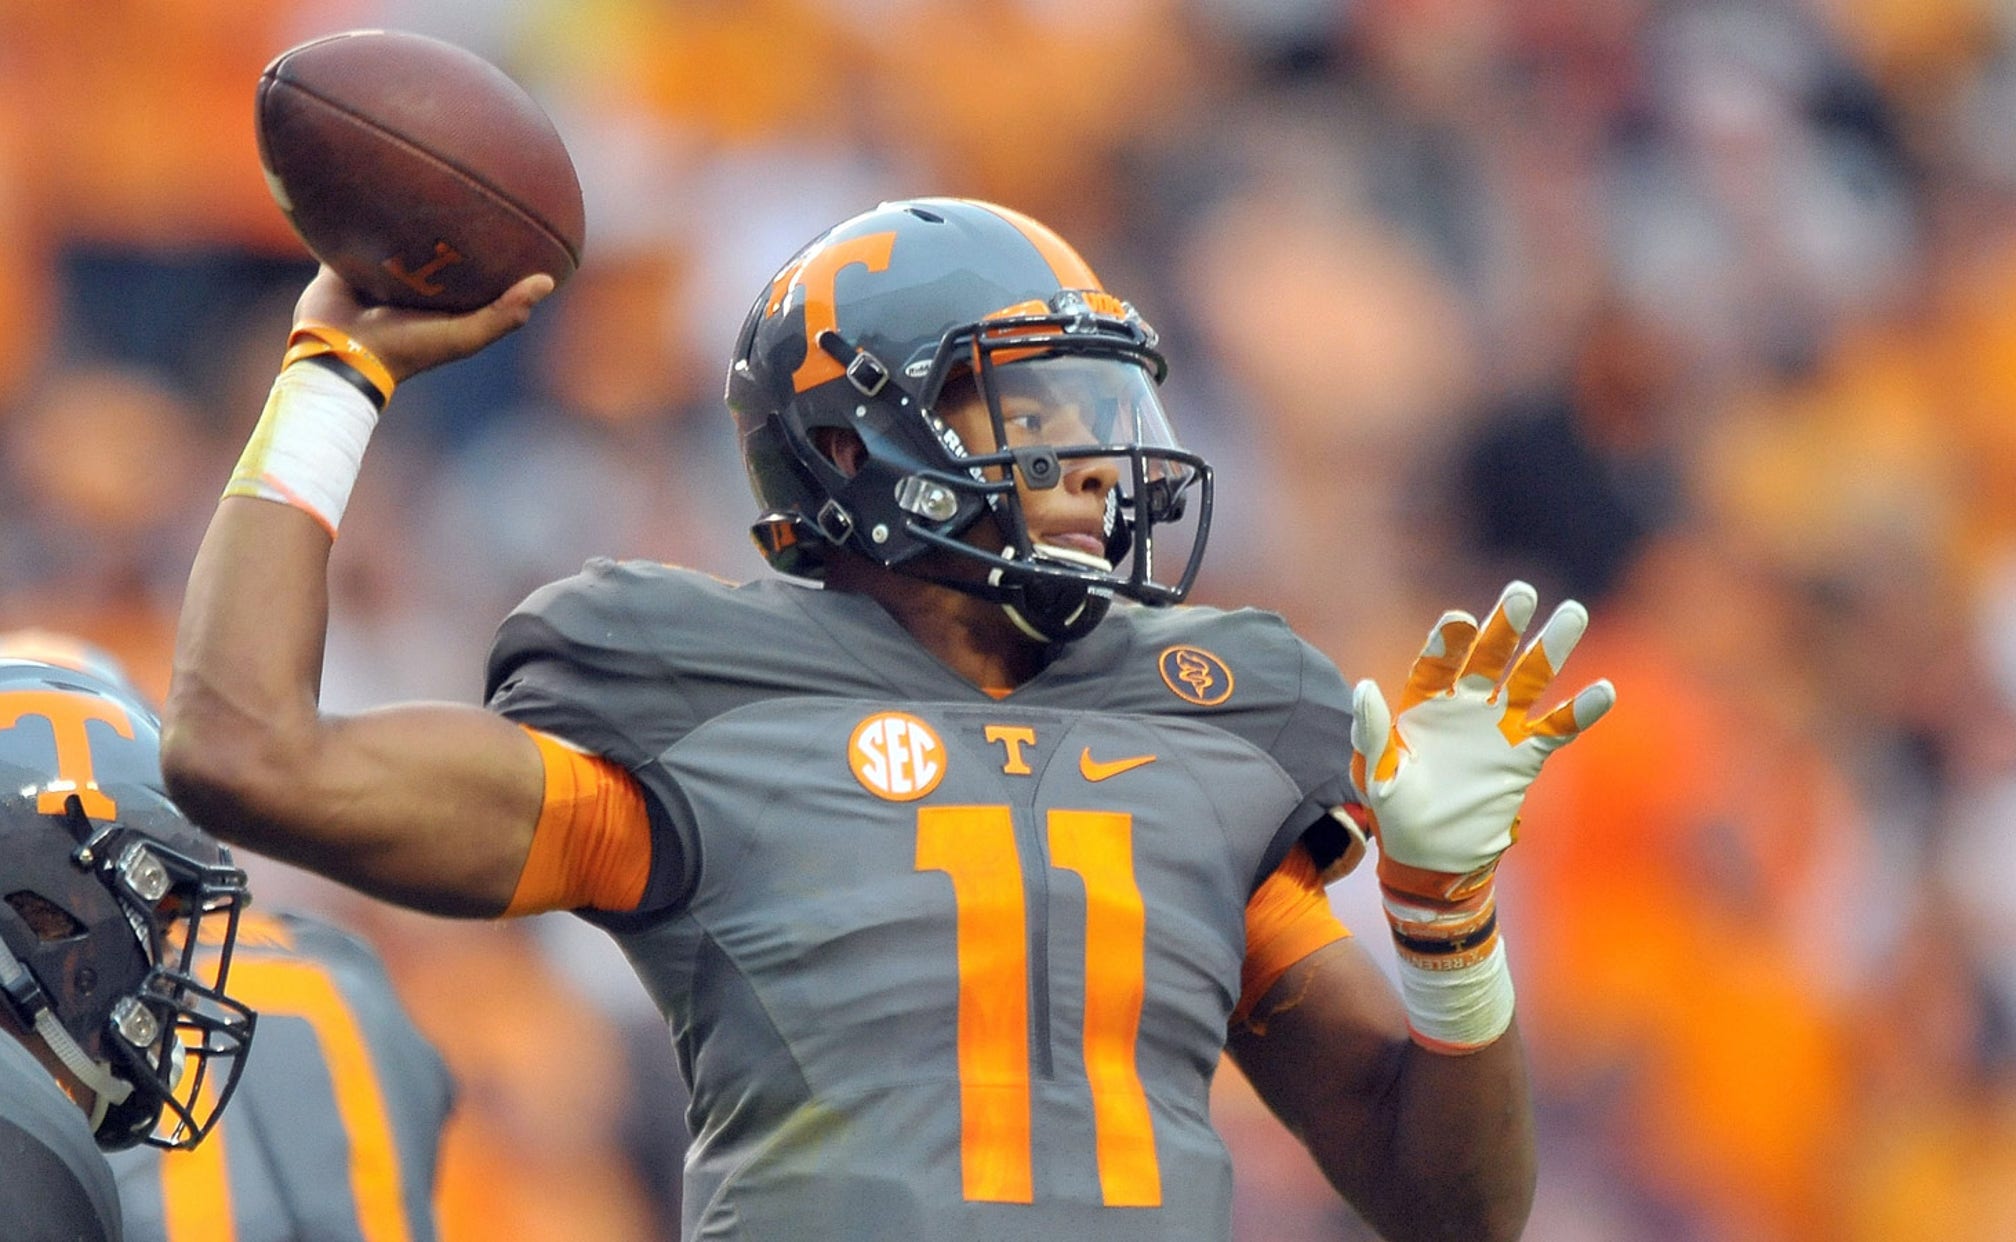 Joshua Dobbs named SEC Offensive Player of the Week after huge performance | FOX Sports